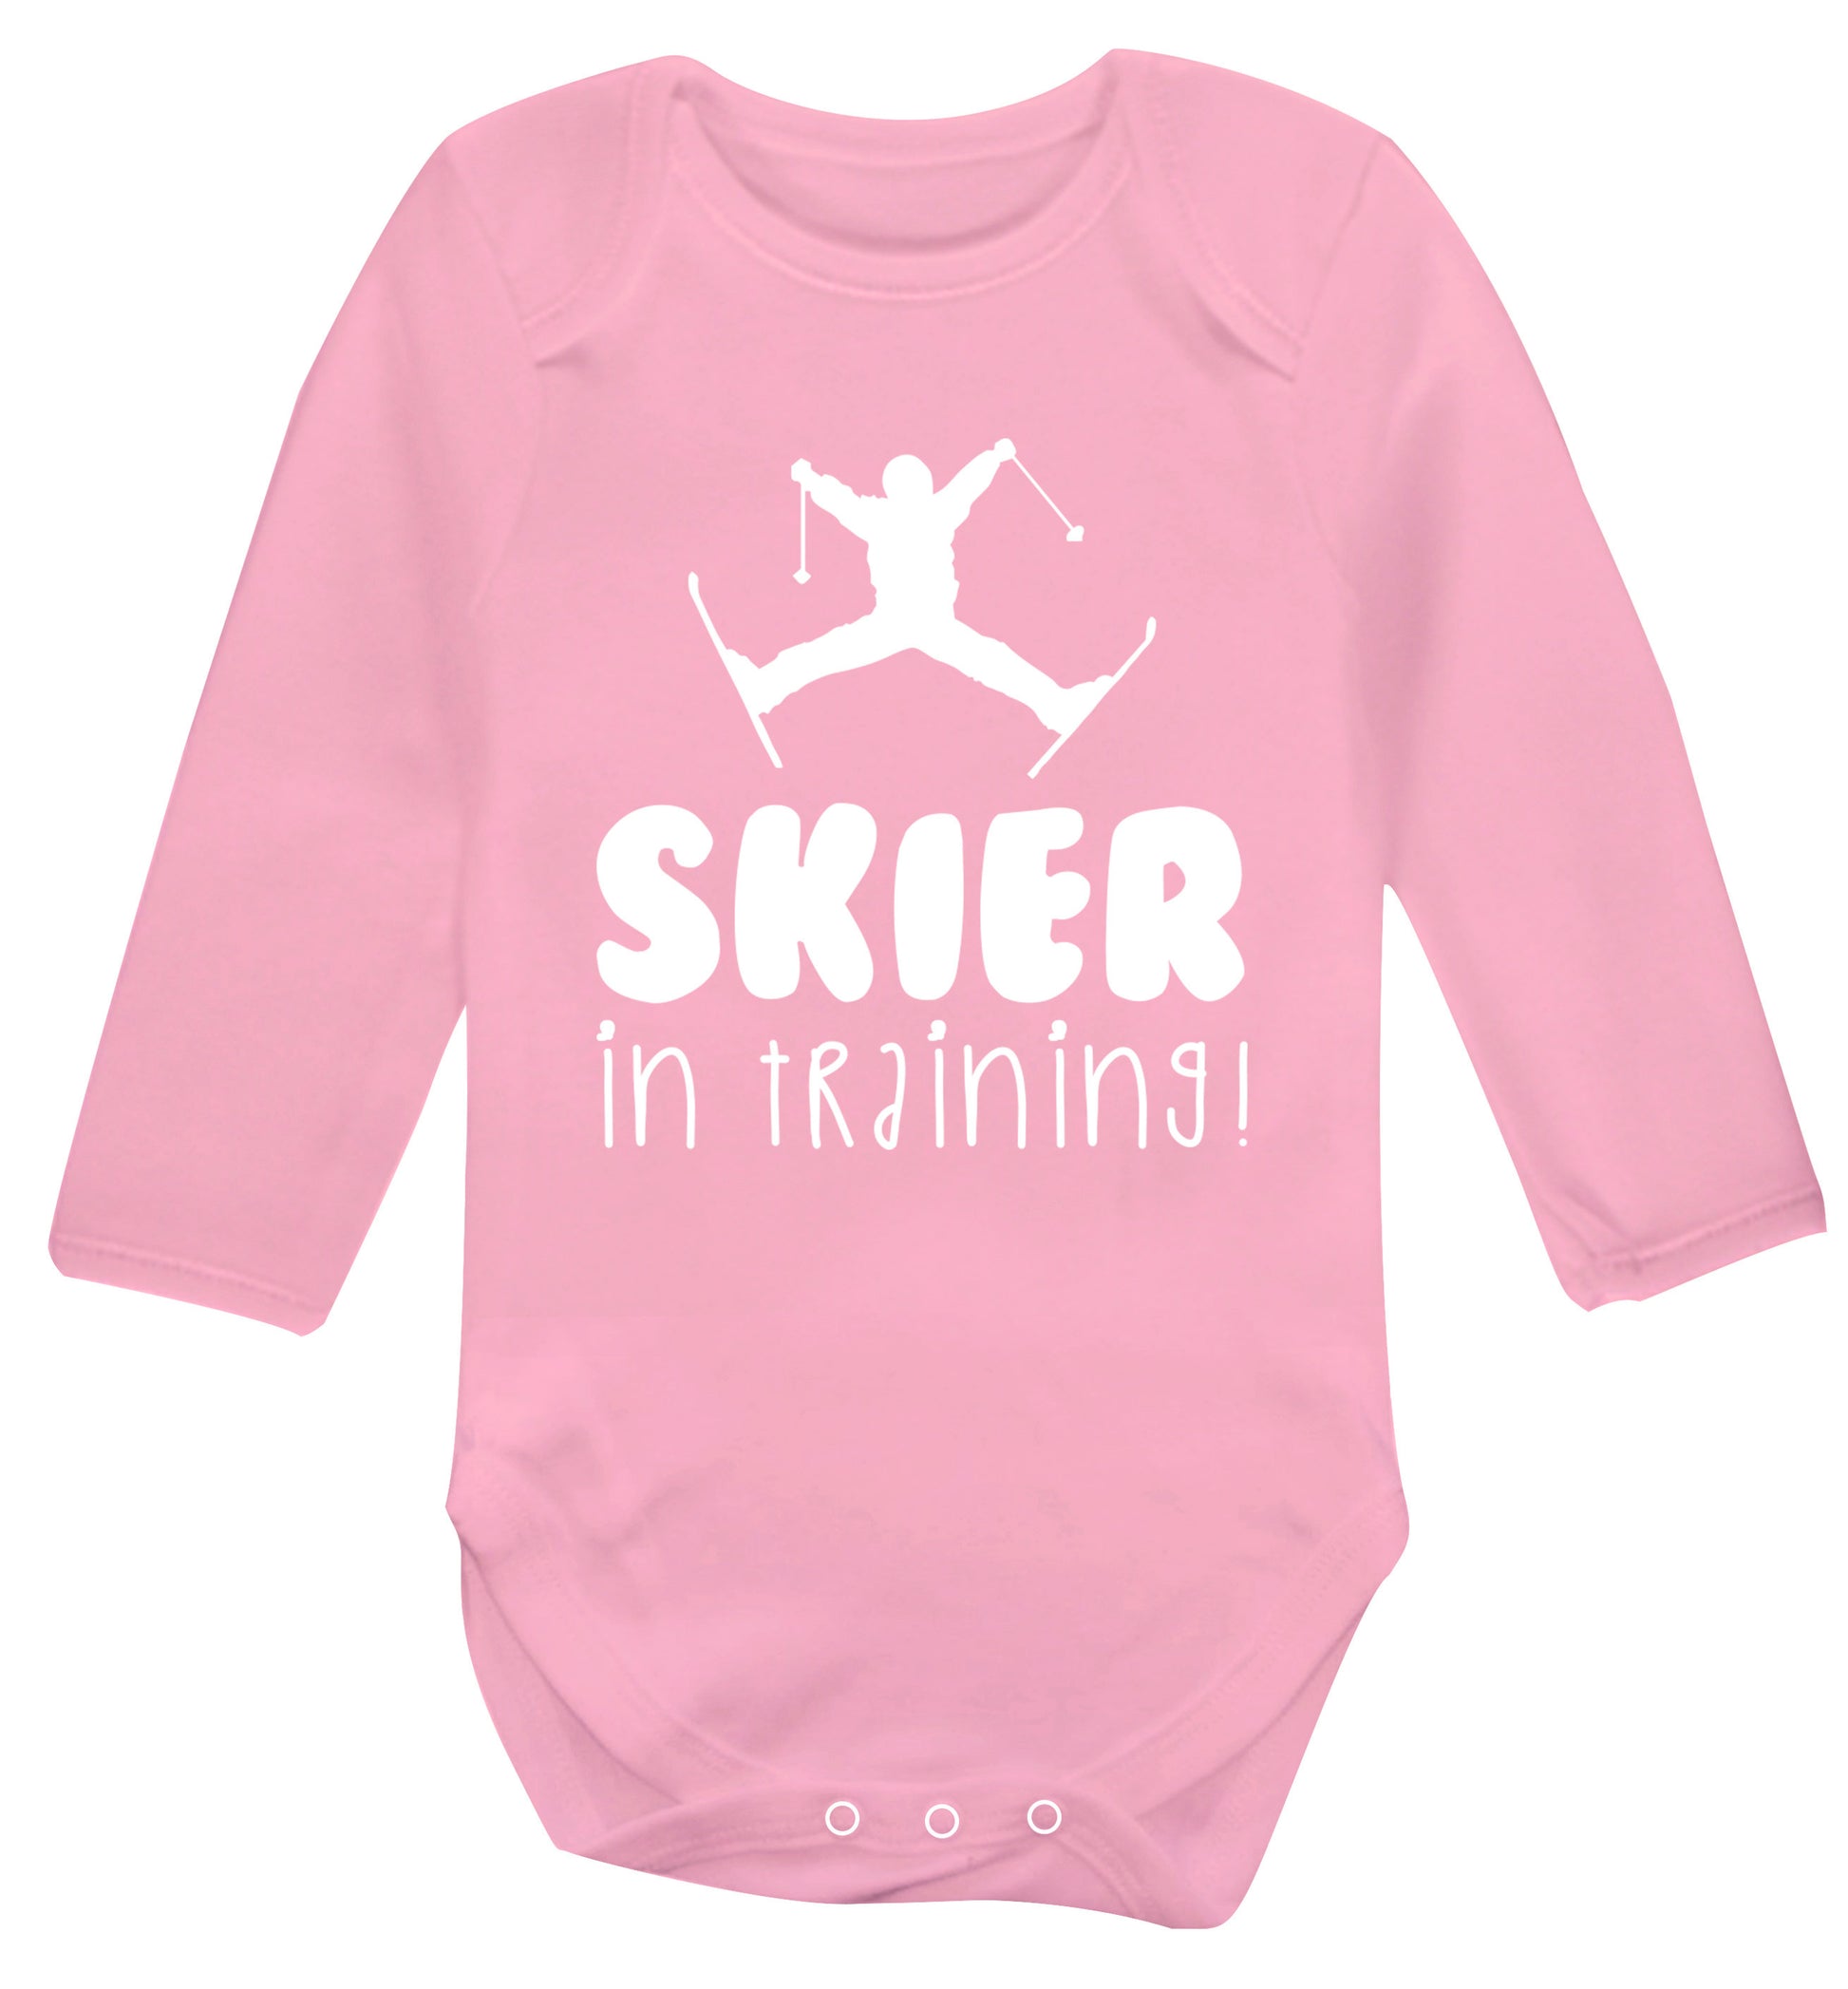 Skier in training Baby Vest long sleeved pale pink 6-12 months